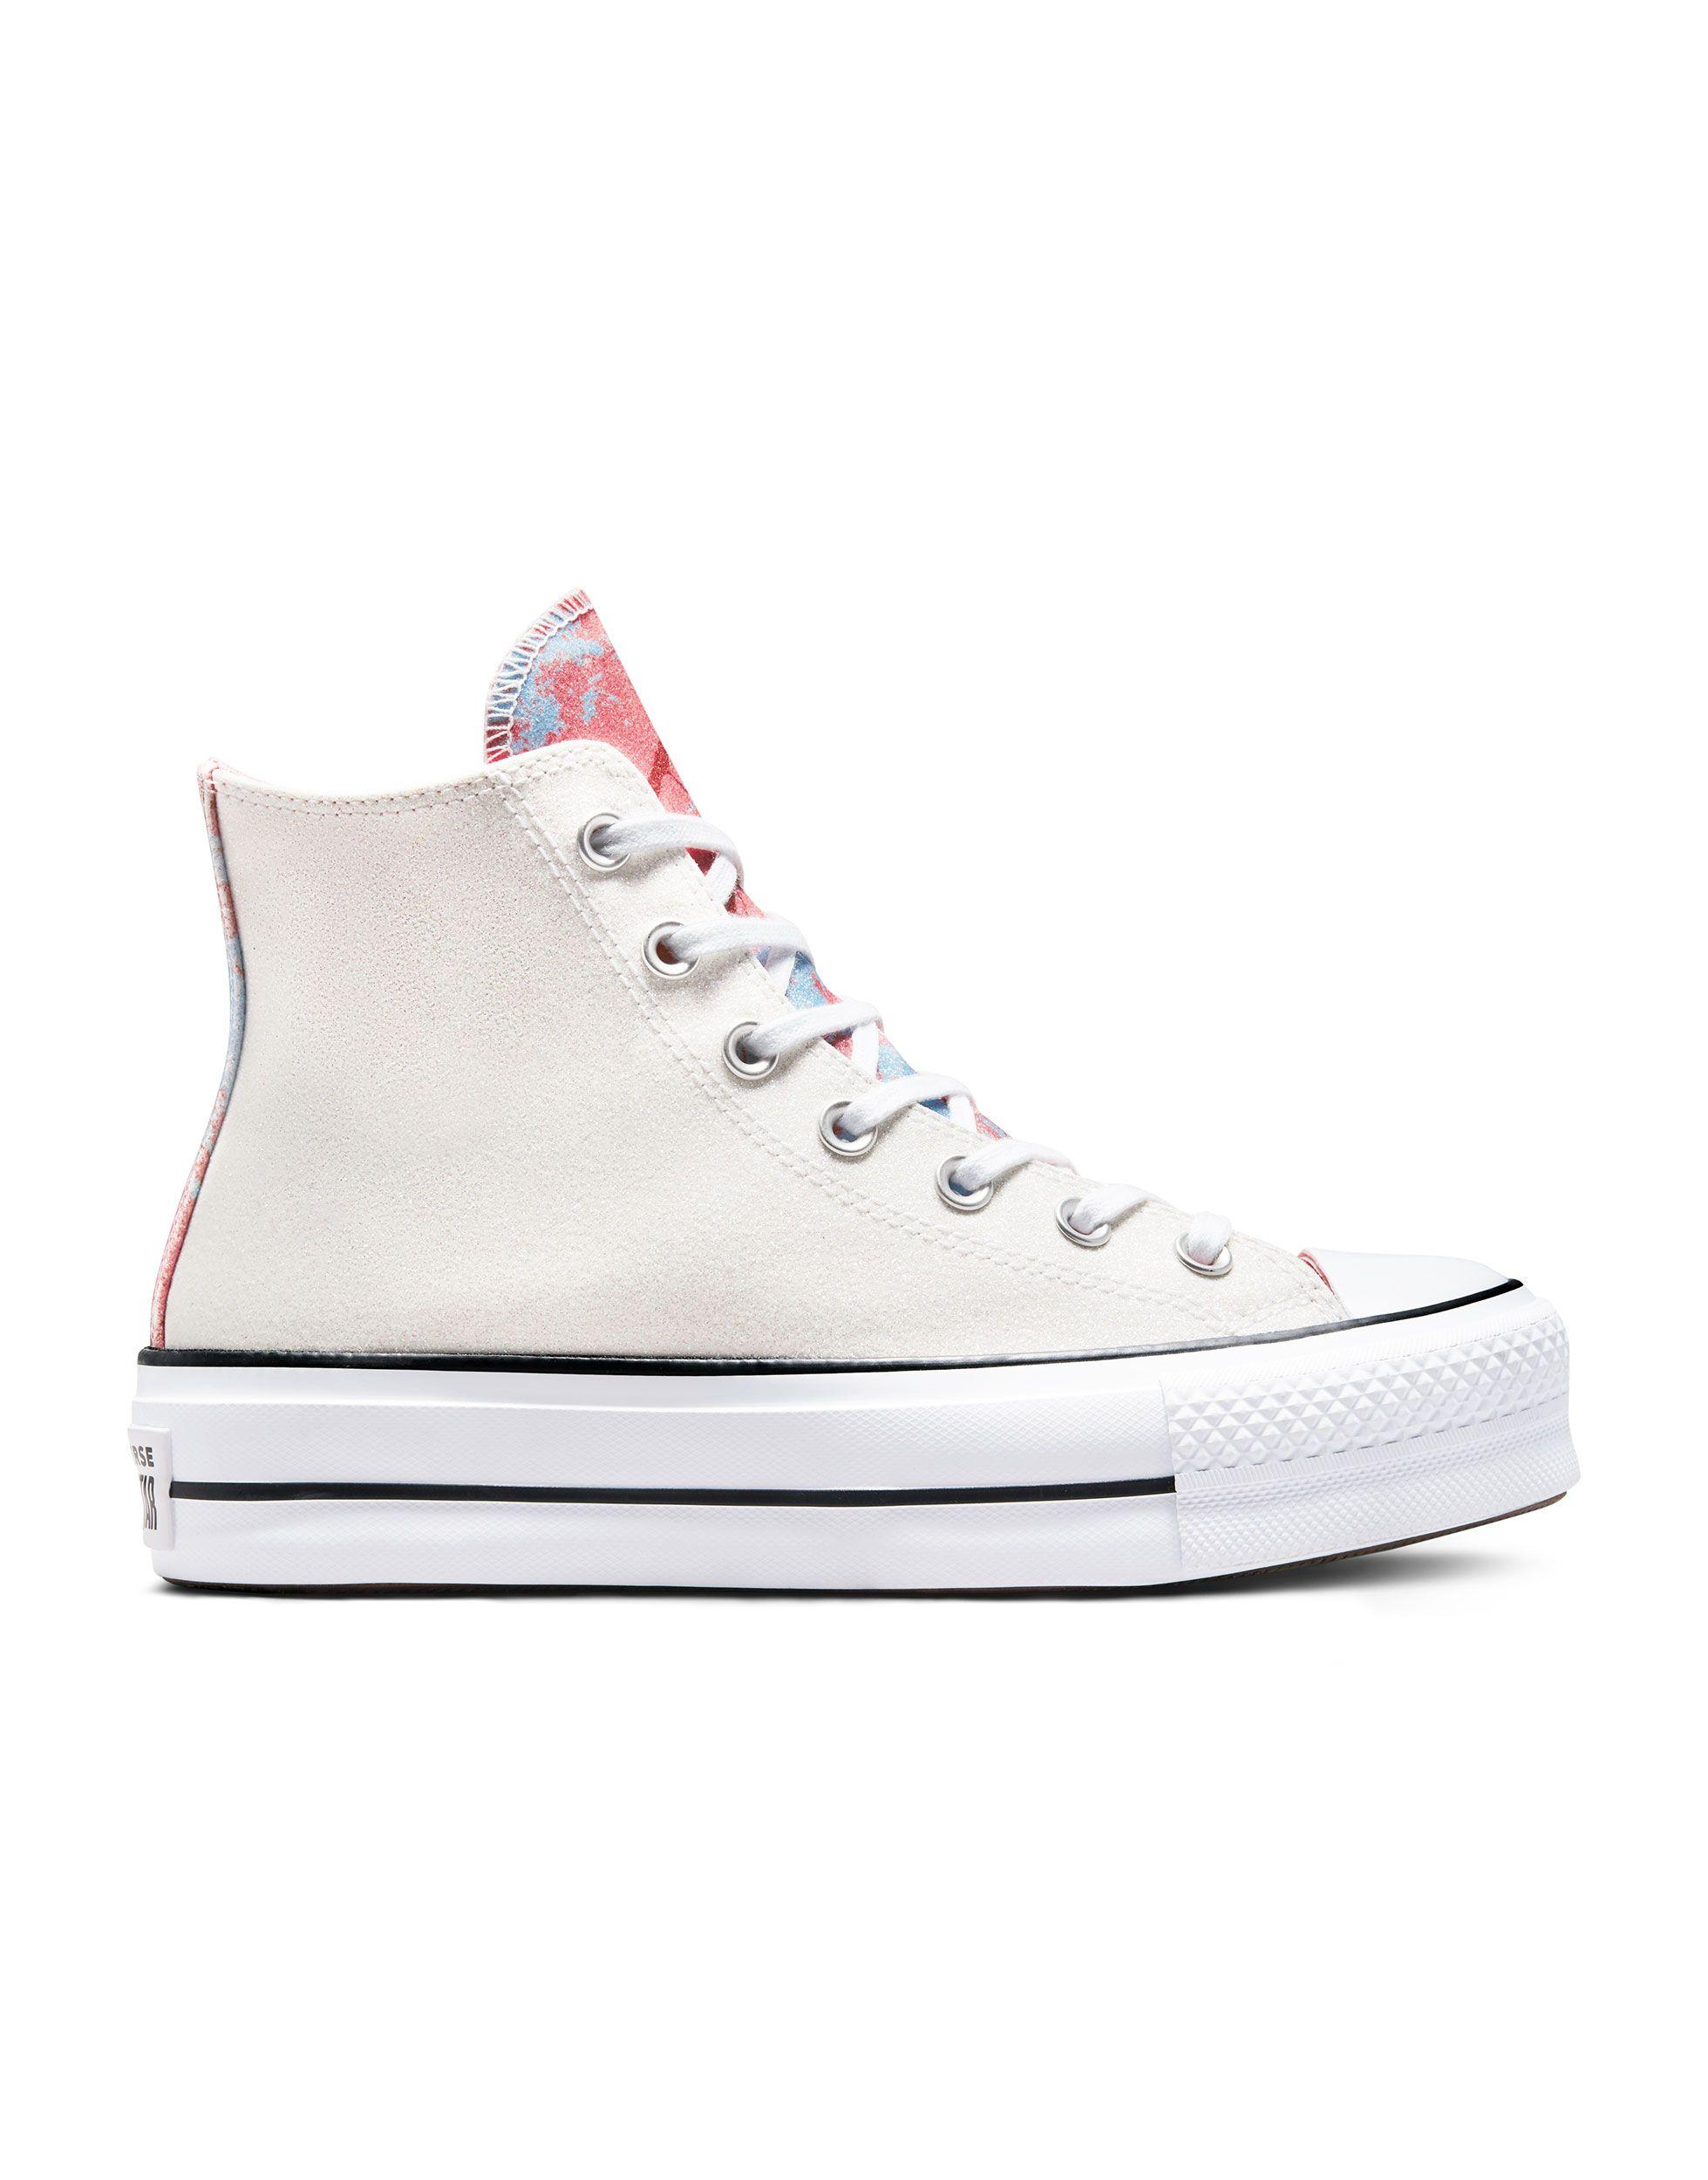 Converse Chuck Taylor All Star Ox Lift Hybrid Shine Glitter Platform  Sneakers in White | Lyst